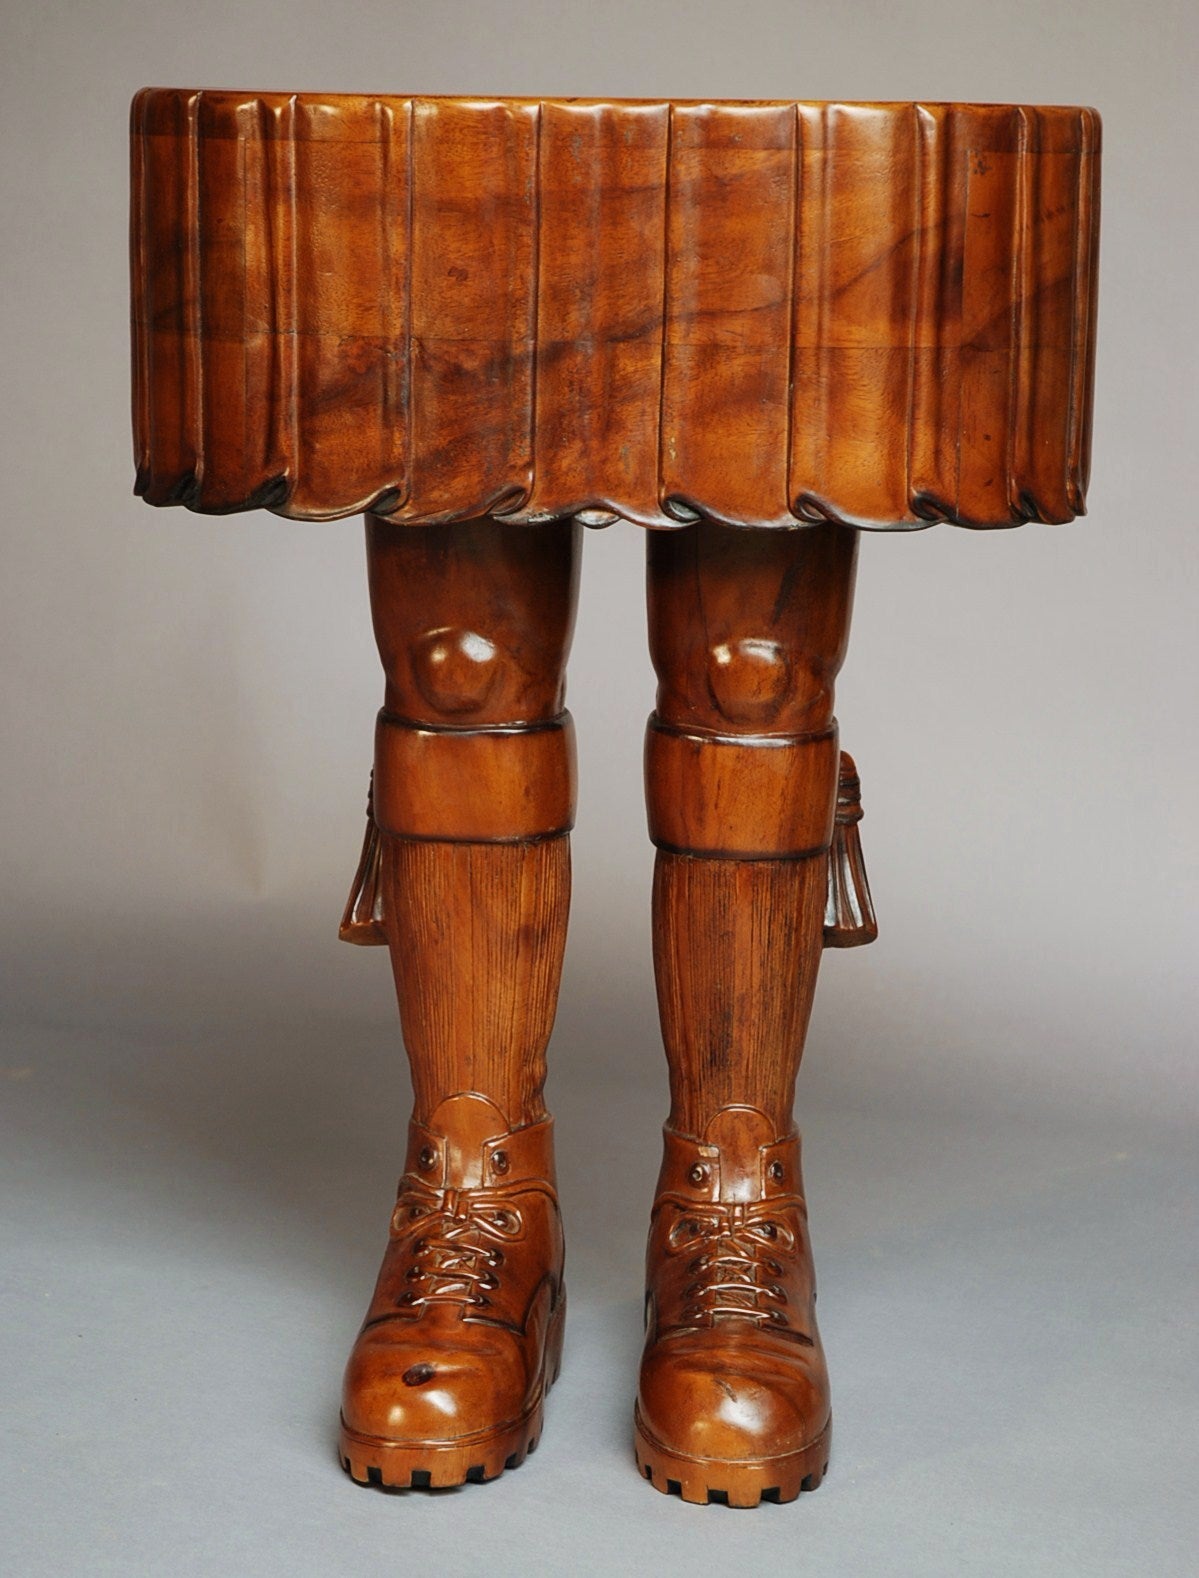 A highly decorative and quirky hardwood Scotsman's legs and kilt table - legs 11 !!

The top is in the form of a Scotsman's kilt with a pair of legs as the base, carved in the form of traditional Scottish attire. 

This table is in excellent